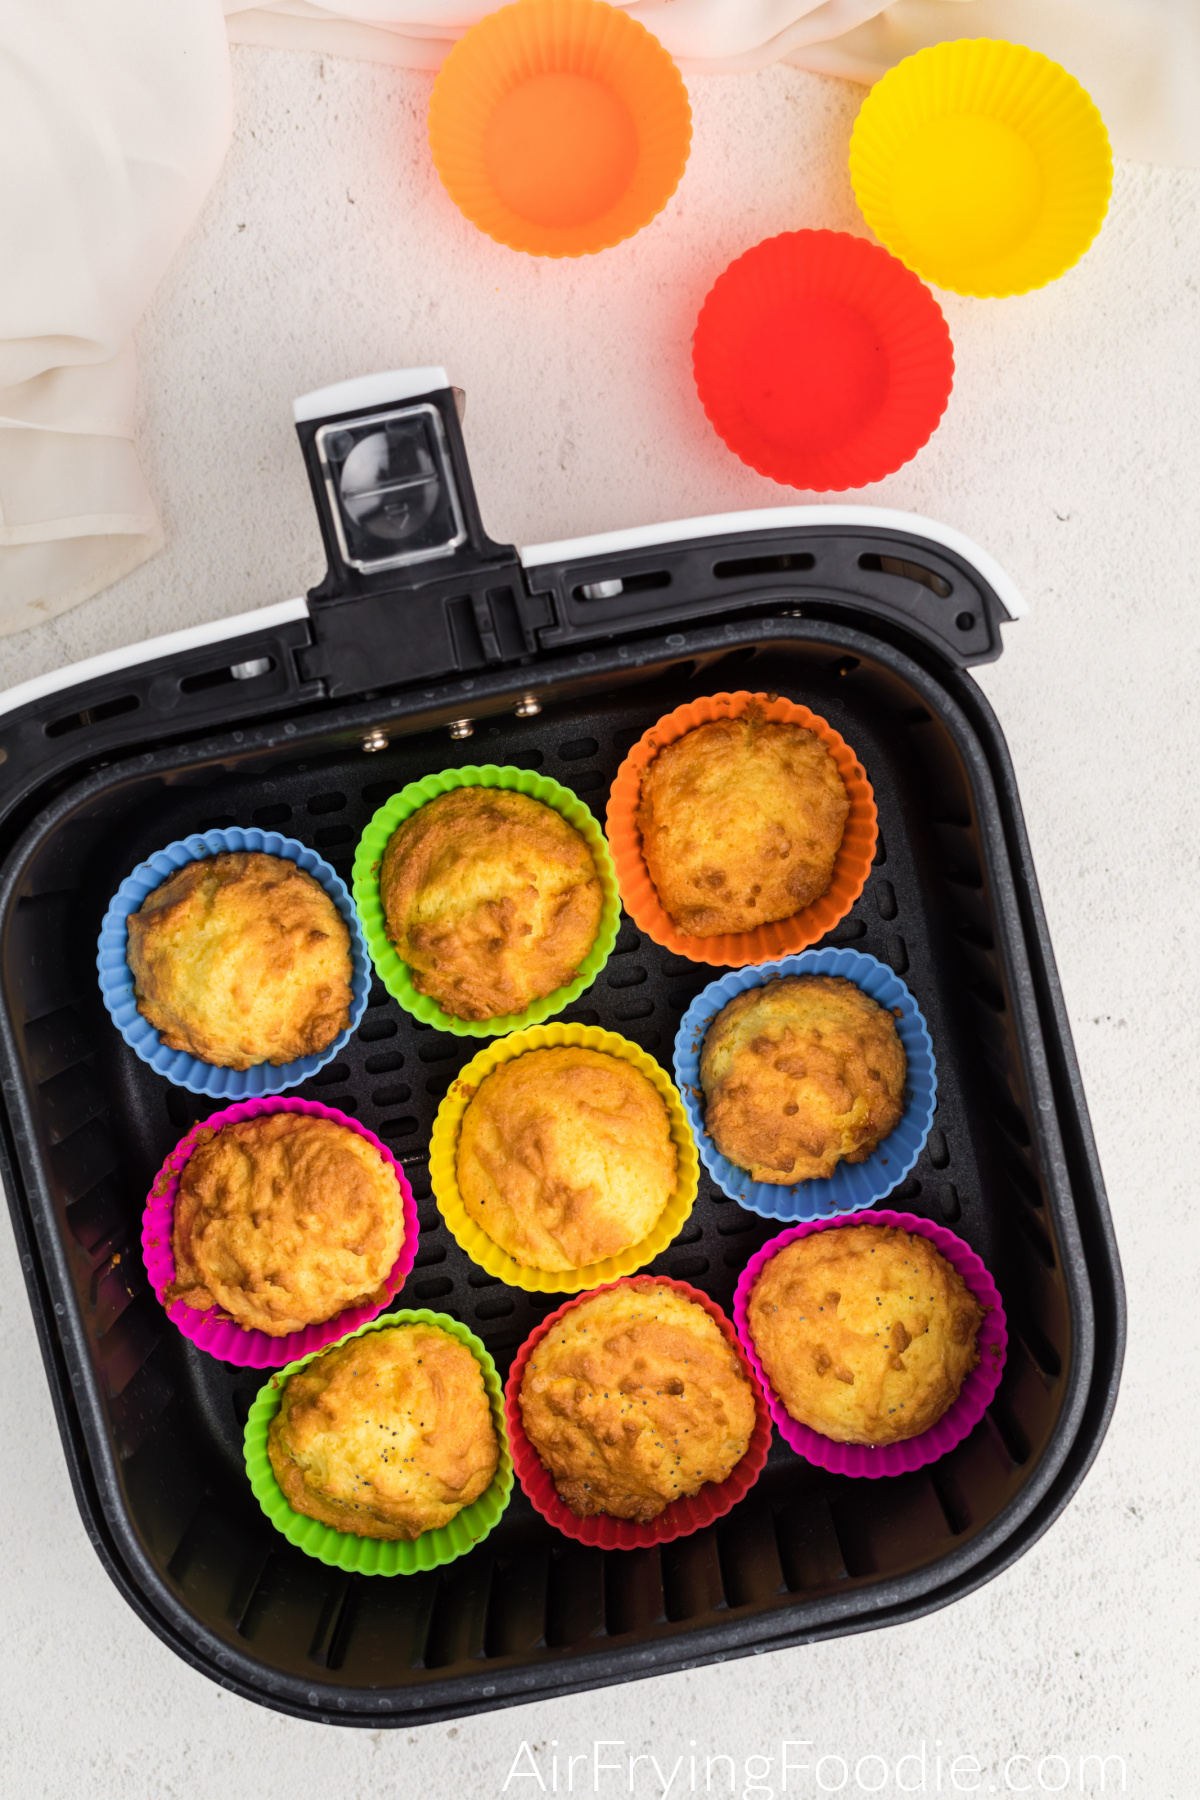 Golden brown air fried lemon poppy seed muffins in silicone muffin cups in the basket of the air fryer.